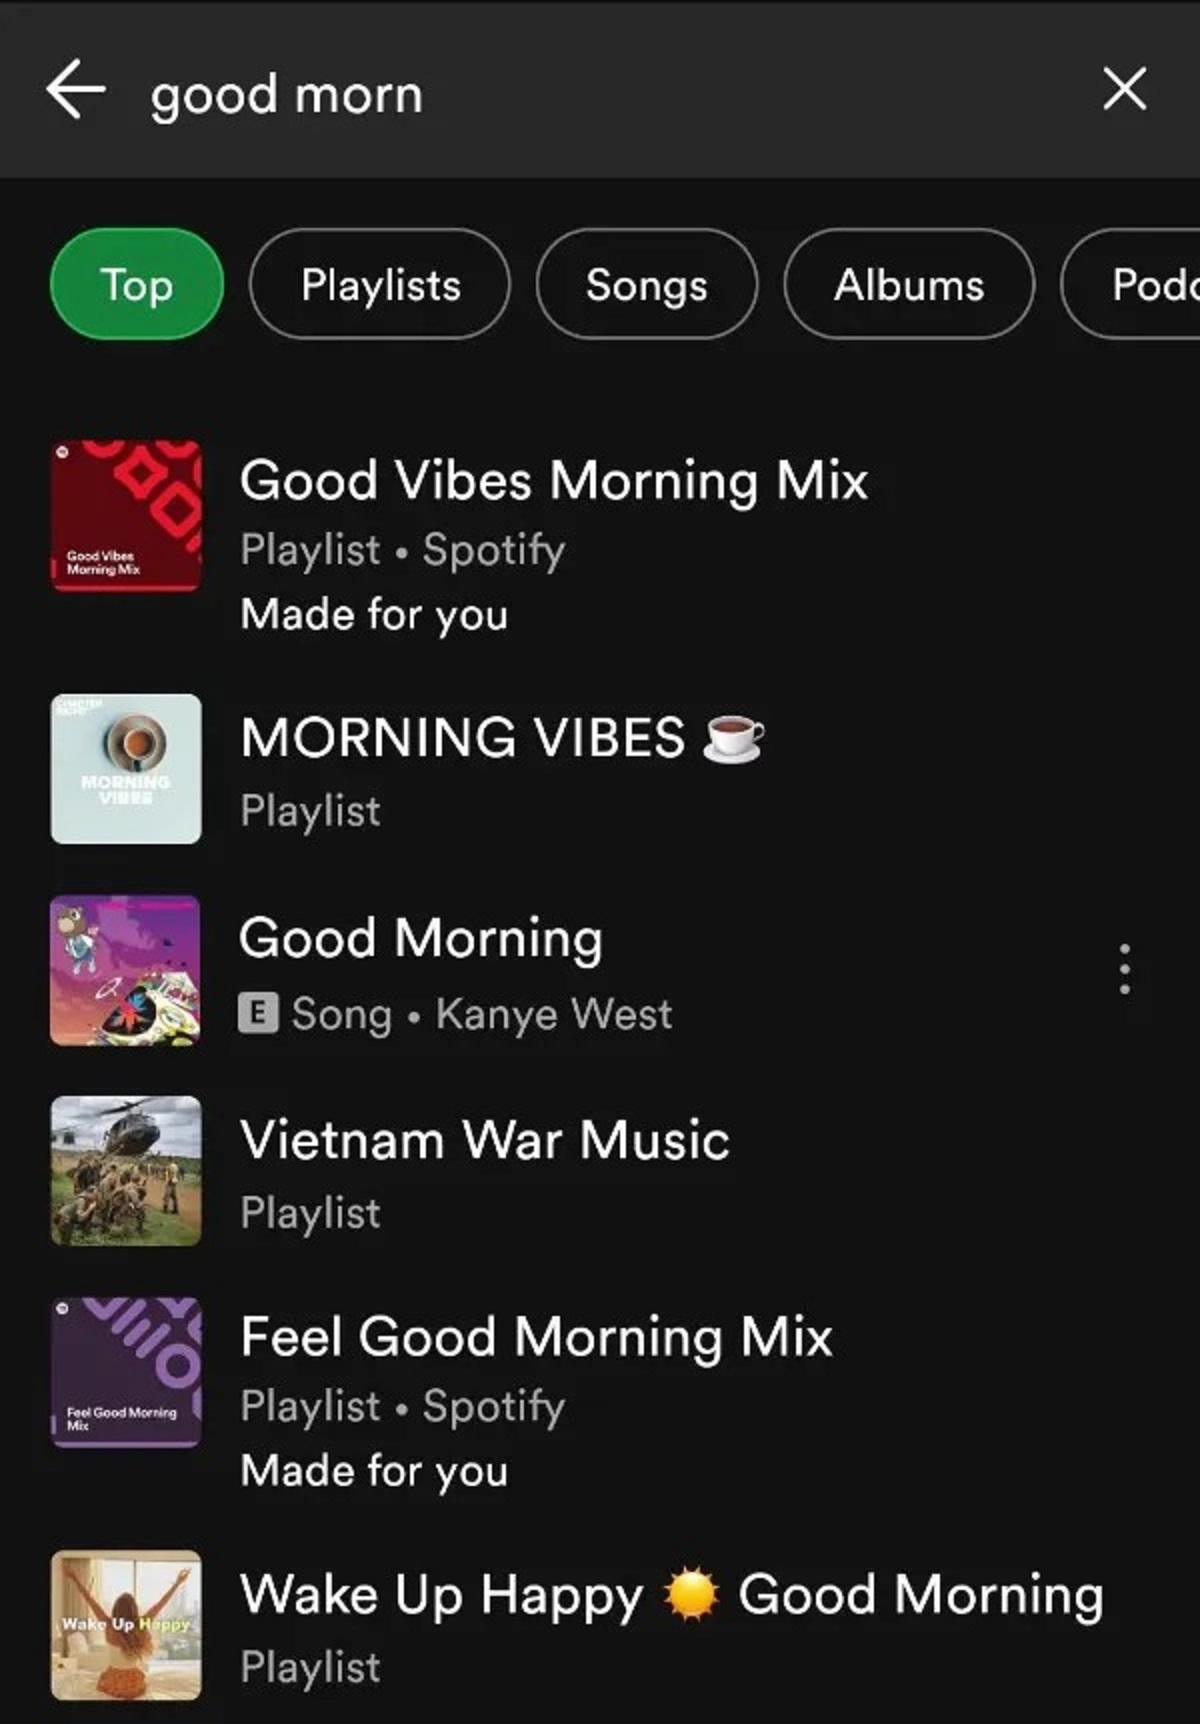 screenshot - good morn Top Good Vibes Morning Mix Simptom 00 Morning Feel Good Morning Mix lilo Wake Up Happy Playlists Songs Good Vibes Morning Mix Playlist . Spotify Made for you Morning Vibes Playlist Good Morning E Song Kanye West Vietnam War Music Pl